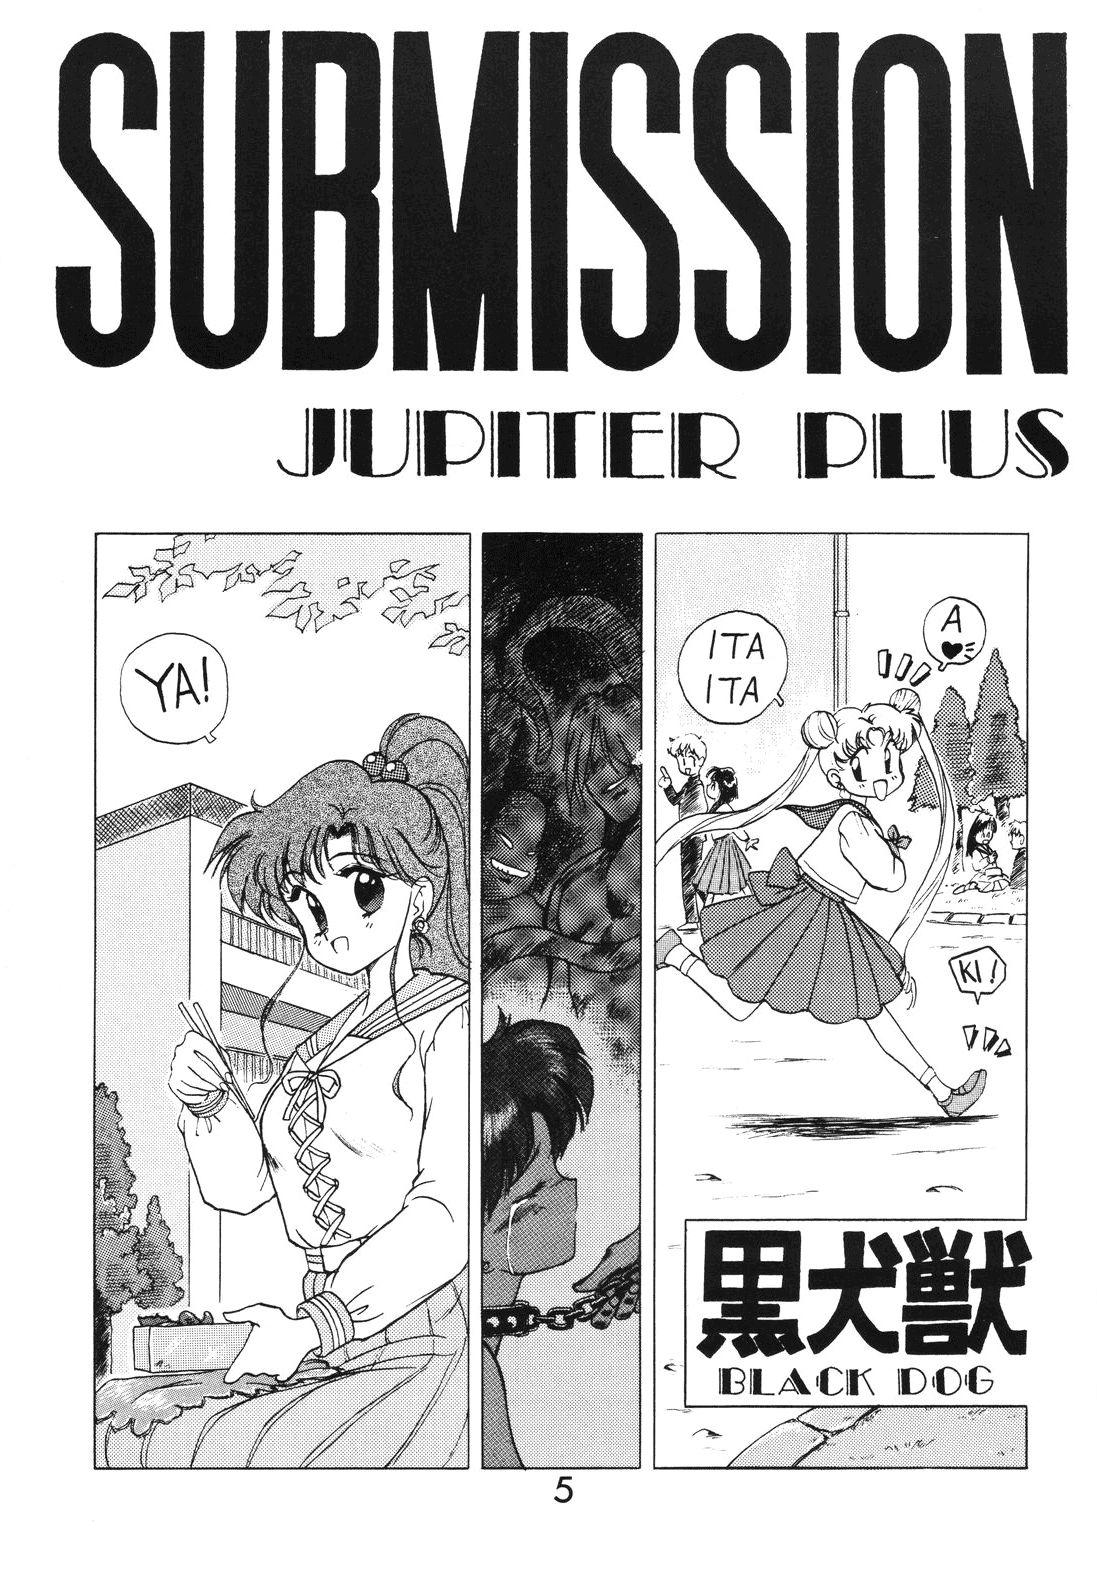 Soapy Massage SUBMISSION JUPITER PLUS - Sailor moon Bbw - Page 5